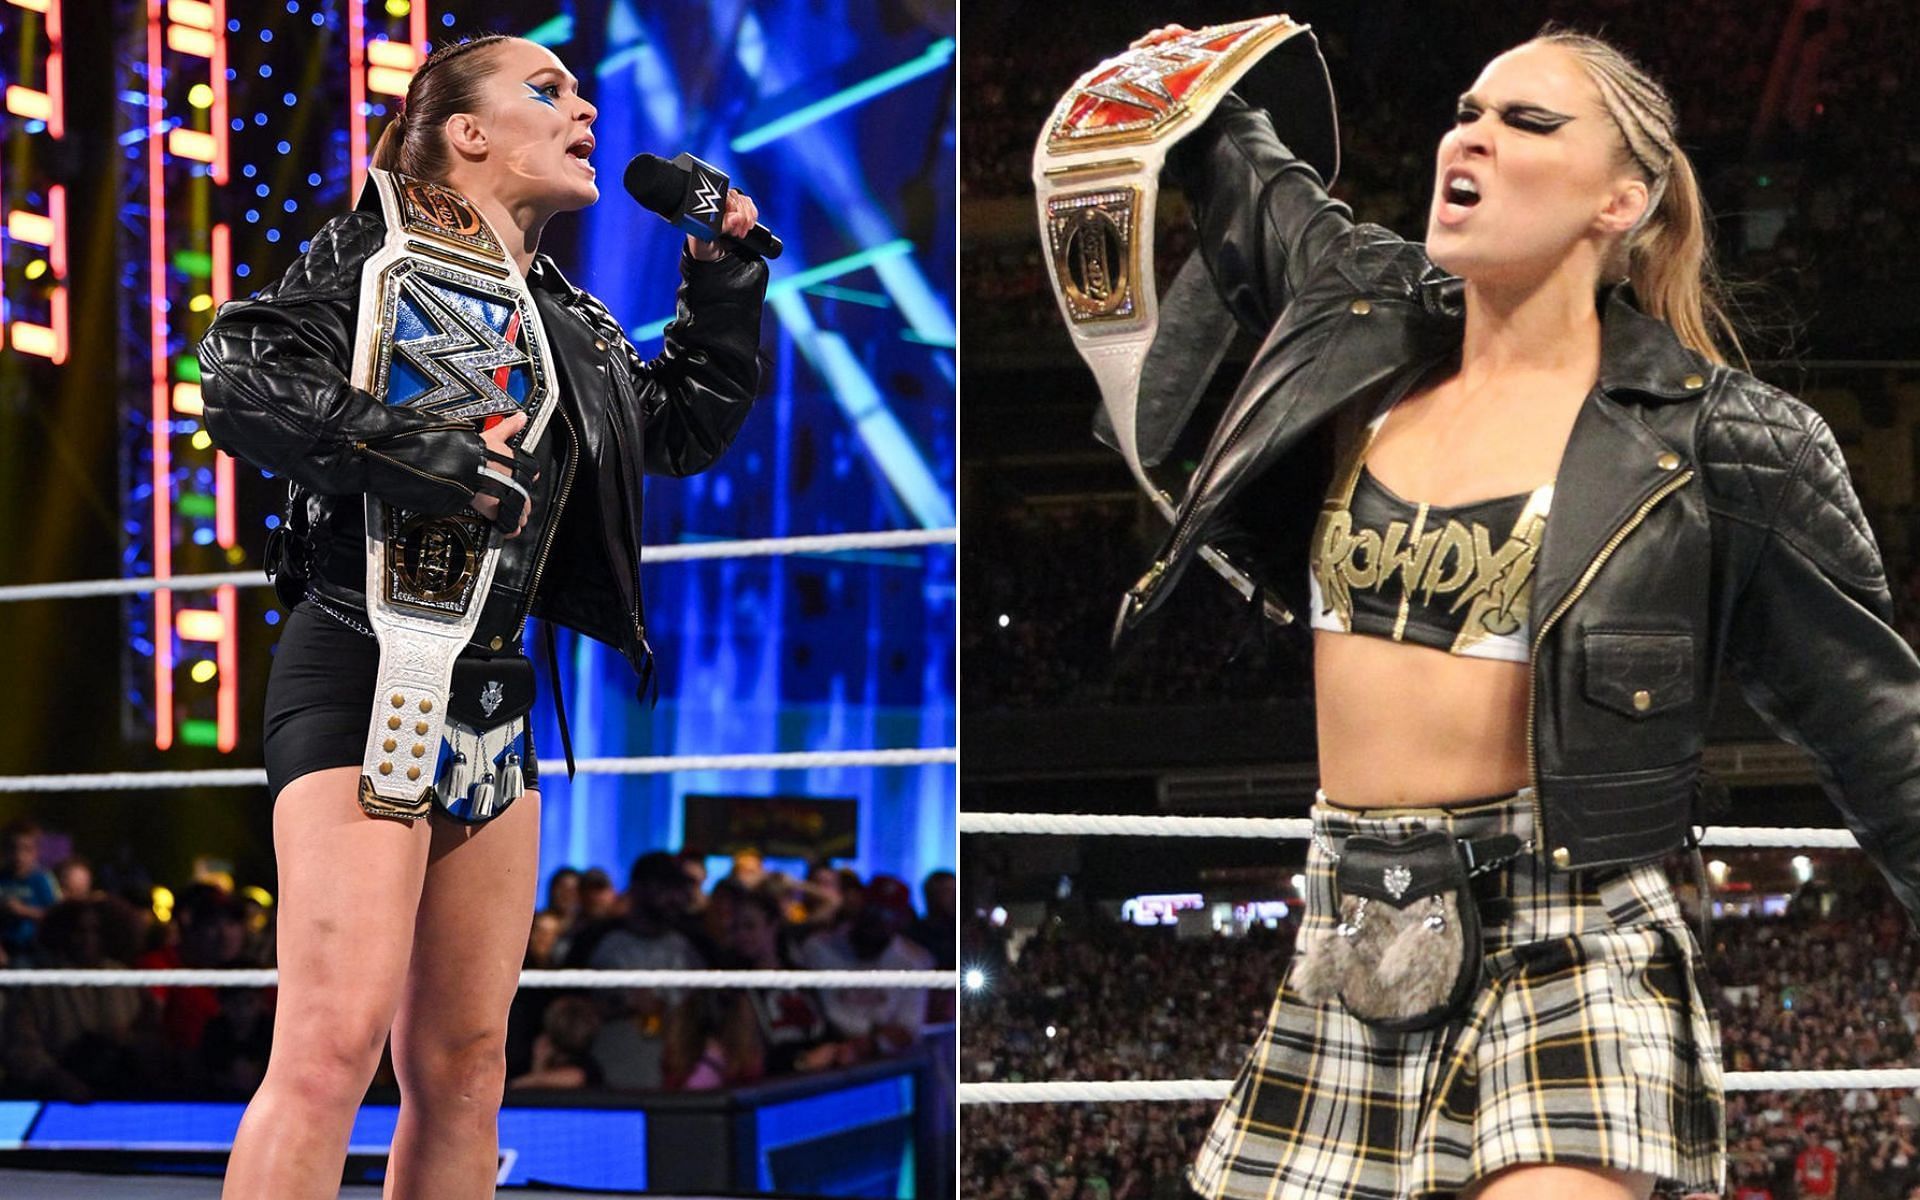 Ronda Rousey is a former RAW and SmackDown Women